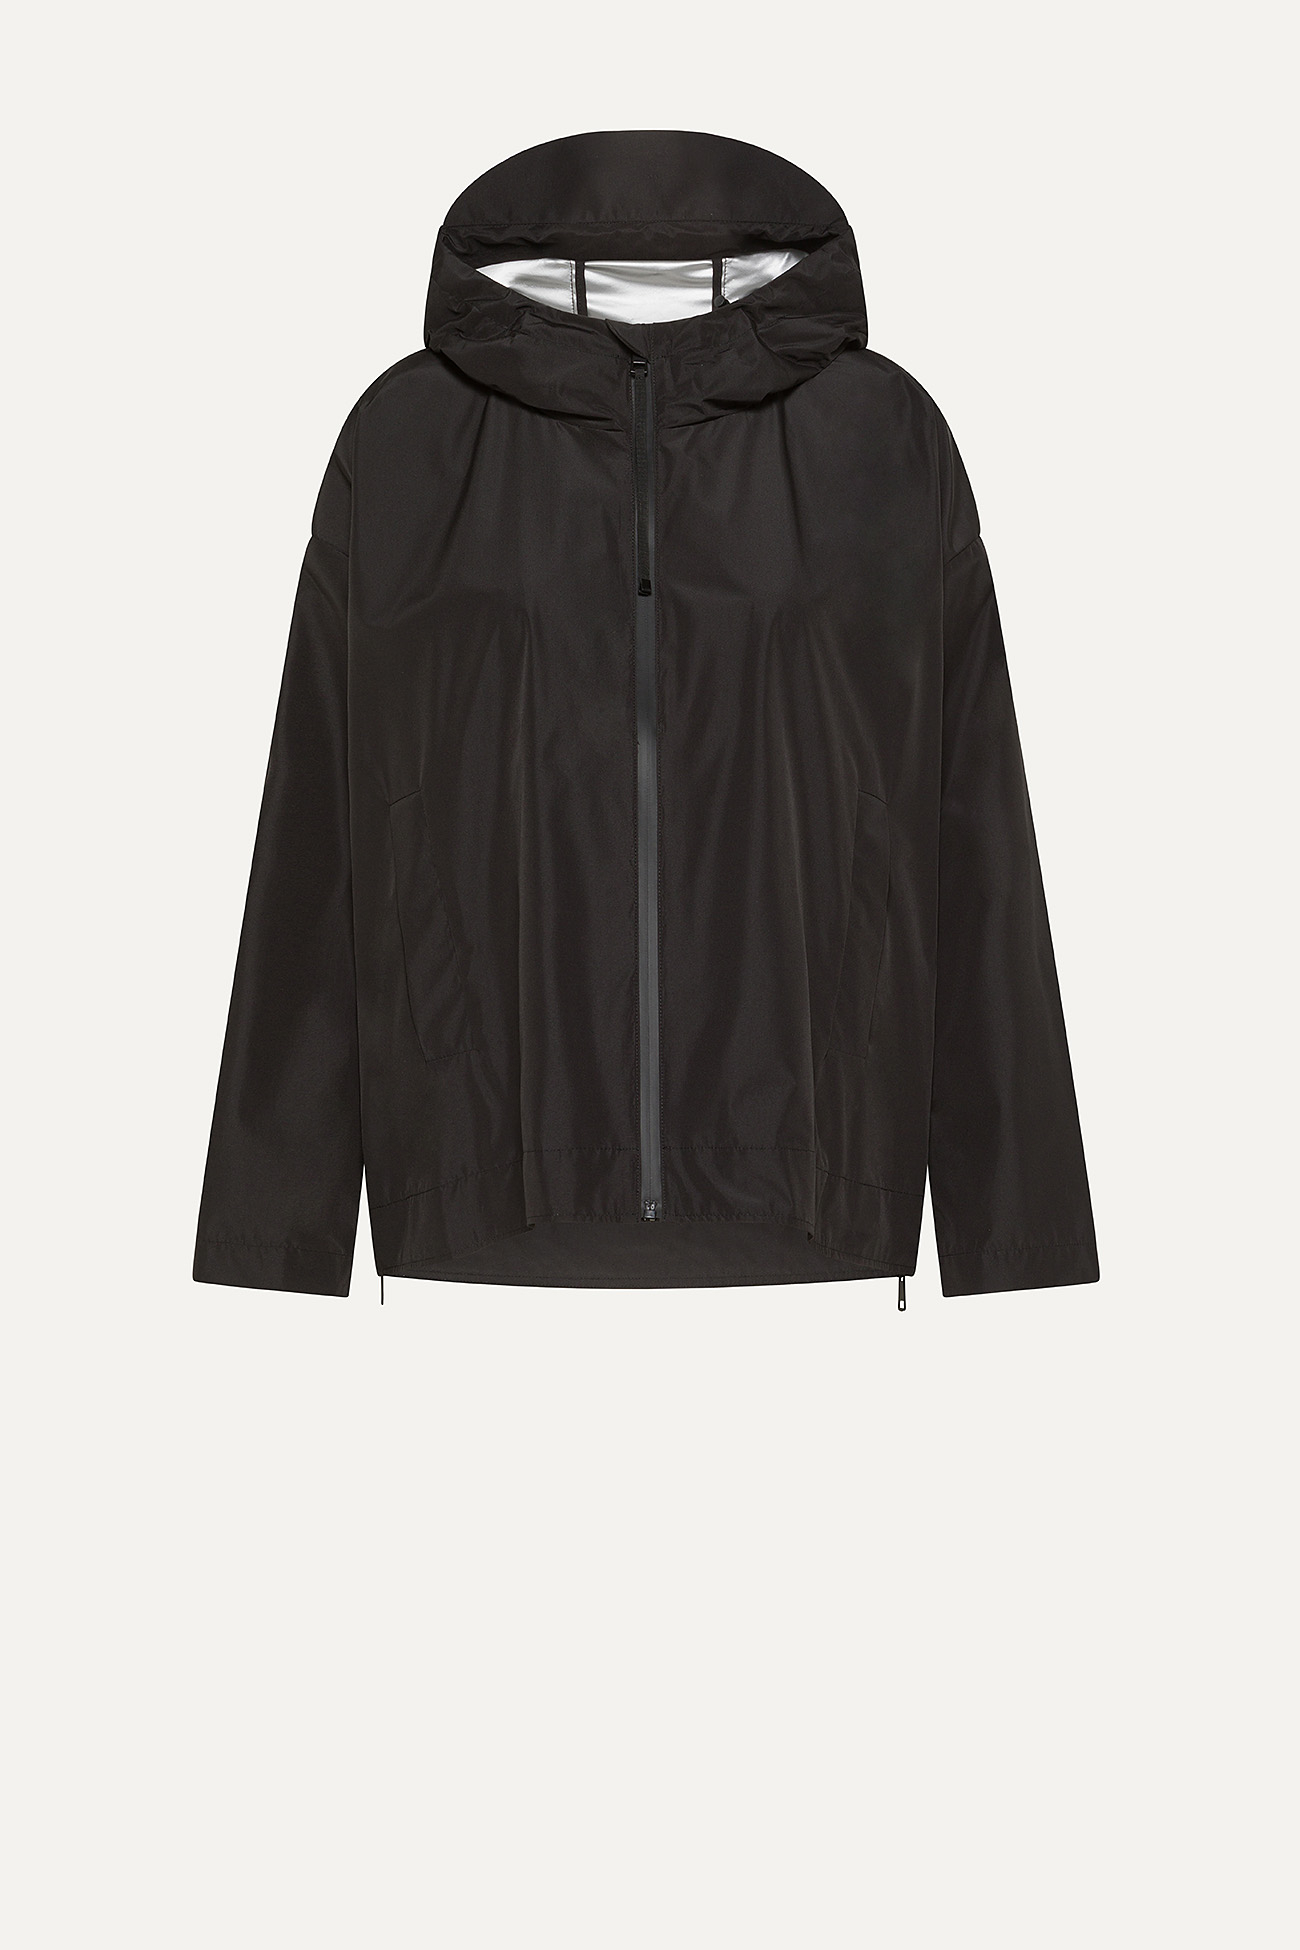 SHORT NYLON JACKET WITH SILVER LINING 9214 - BLACK - OOF WEAR